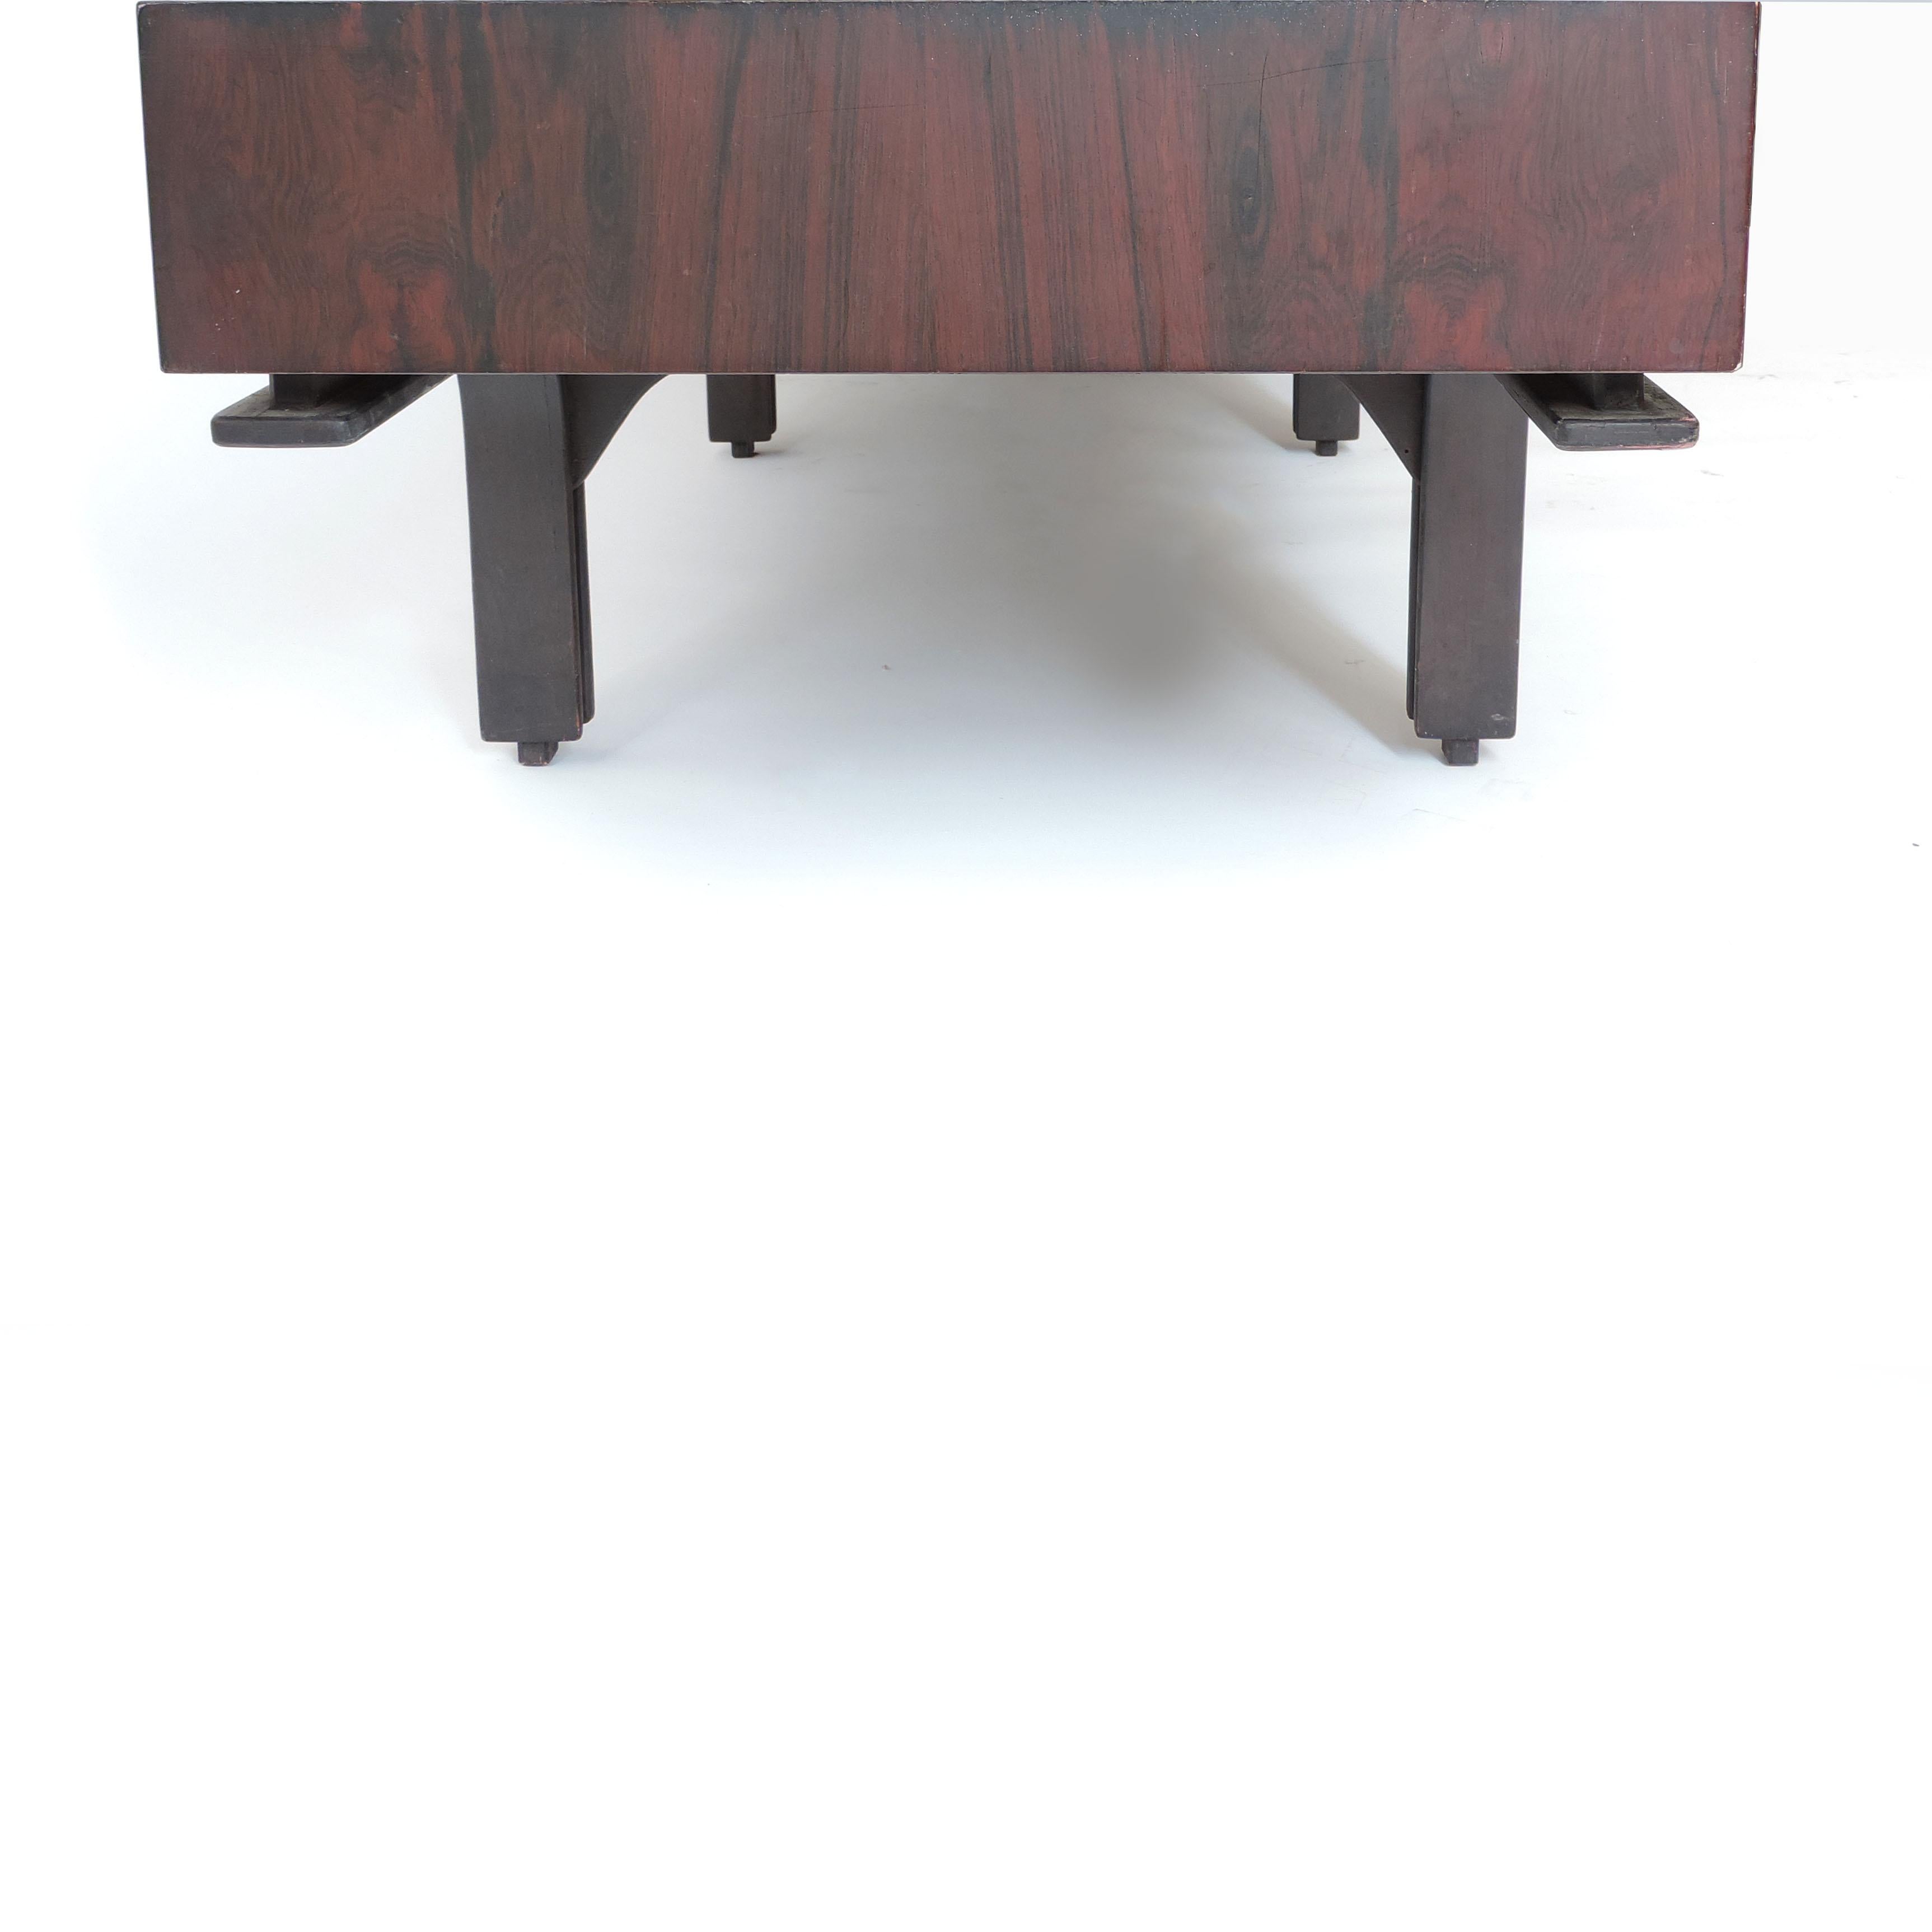 Gianfranco Frattini sideboard/Bench for Bernini, Italy, 1963.
Ref: Domus No. 401 - April 1963 p.5
Low console featuring six drawers can also be utilized as a bench.
      